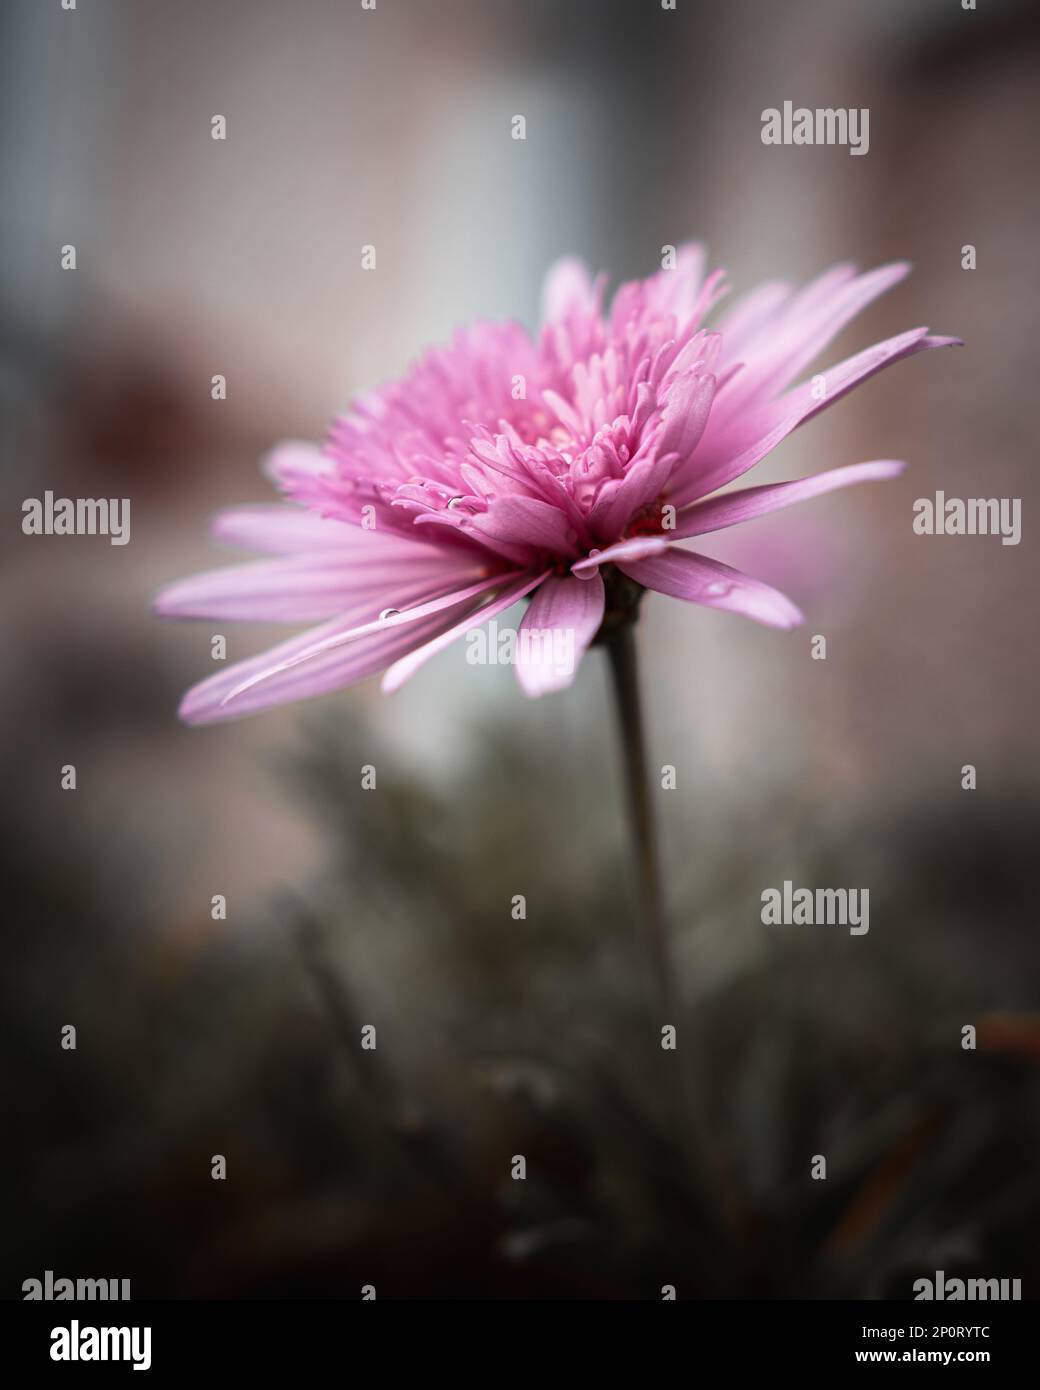 One pink China aster flower growing in nature with soft selective focus and creamy pastel colors on a blurred light background Stock Photo